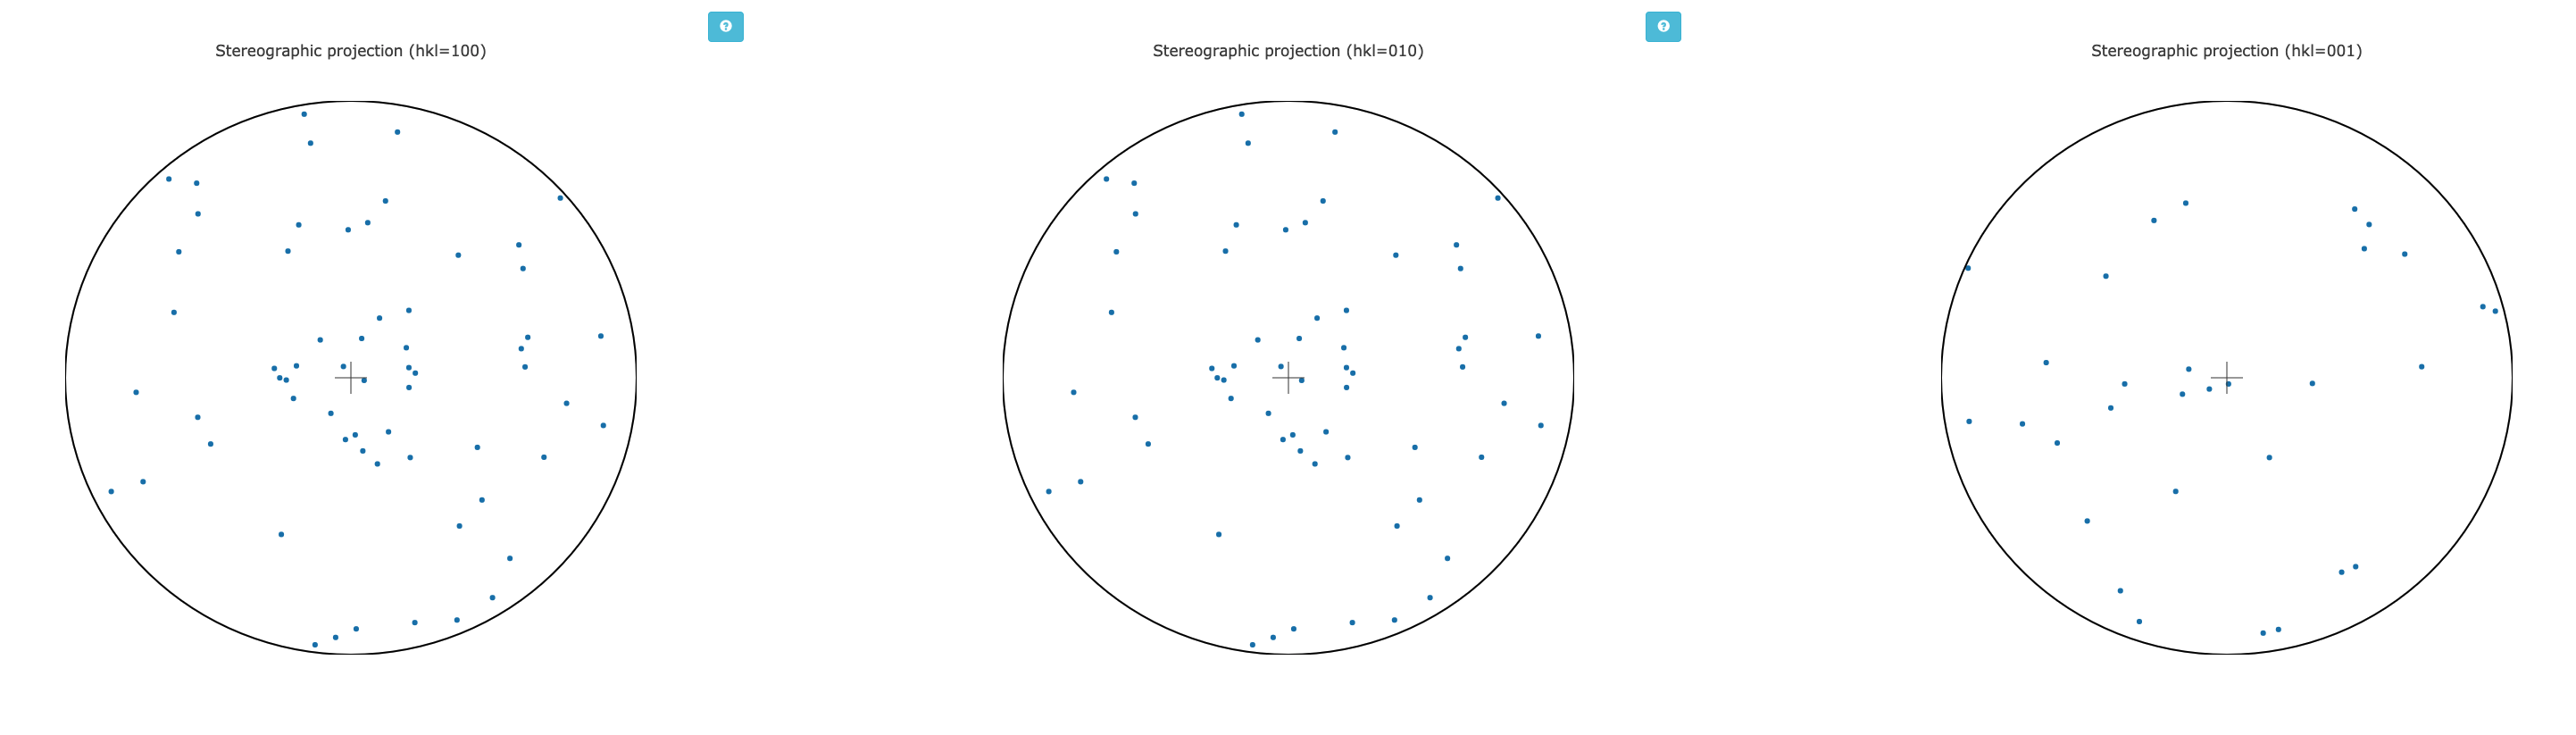 Stereographic projection of unit cell axes